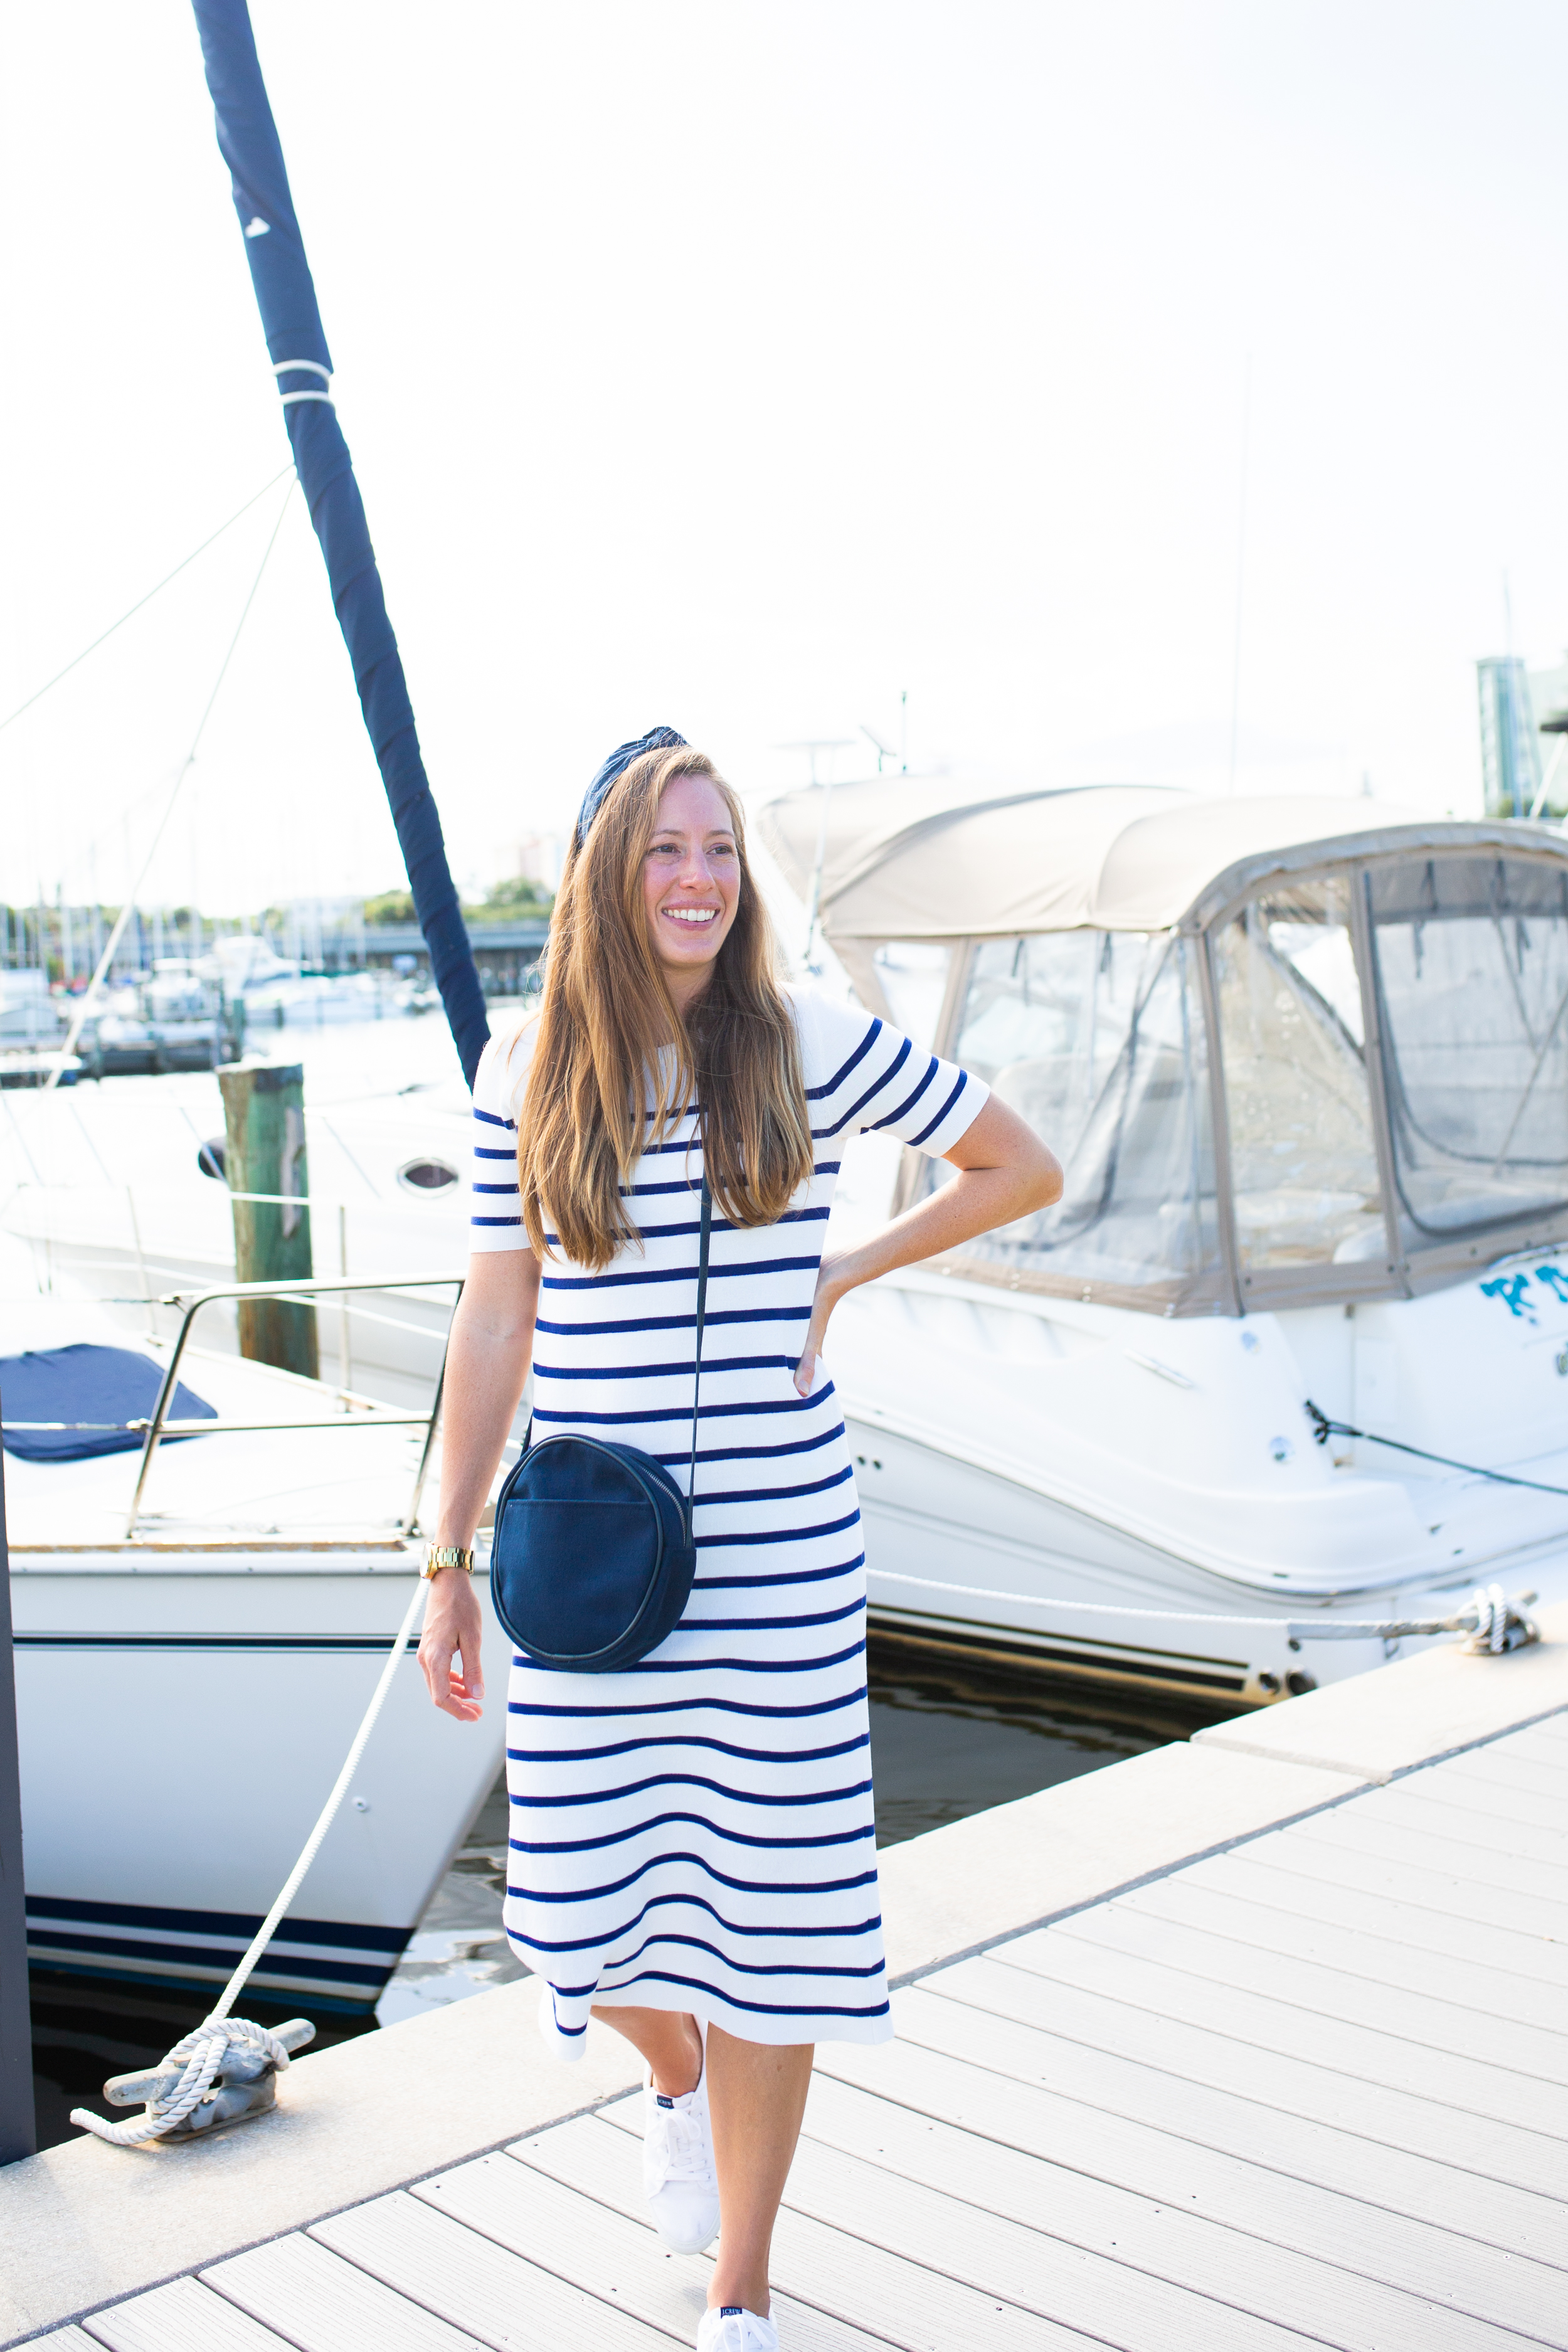 Transition from summer to fall with a sweater dress! A classic striped dress styled with sneakers, a hat and denim jacket is a perfect late summer outfit. Read the full post with dressing for fall in warm-weather! 